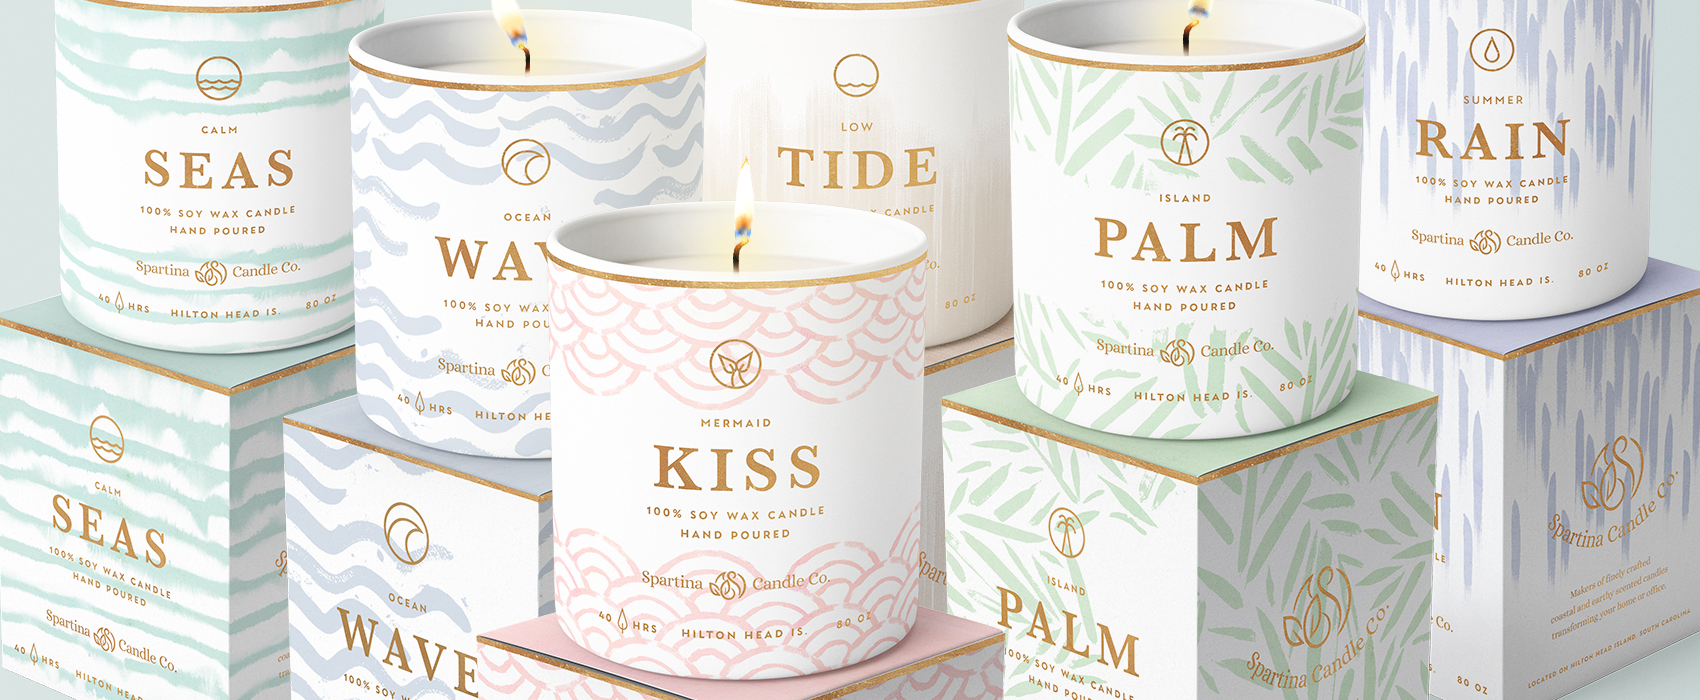 Lowcountry Candle Logo and Package Design